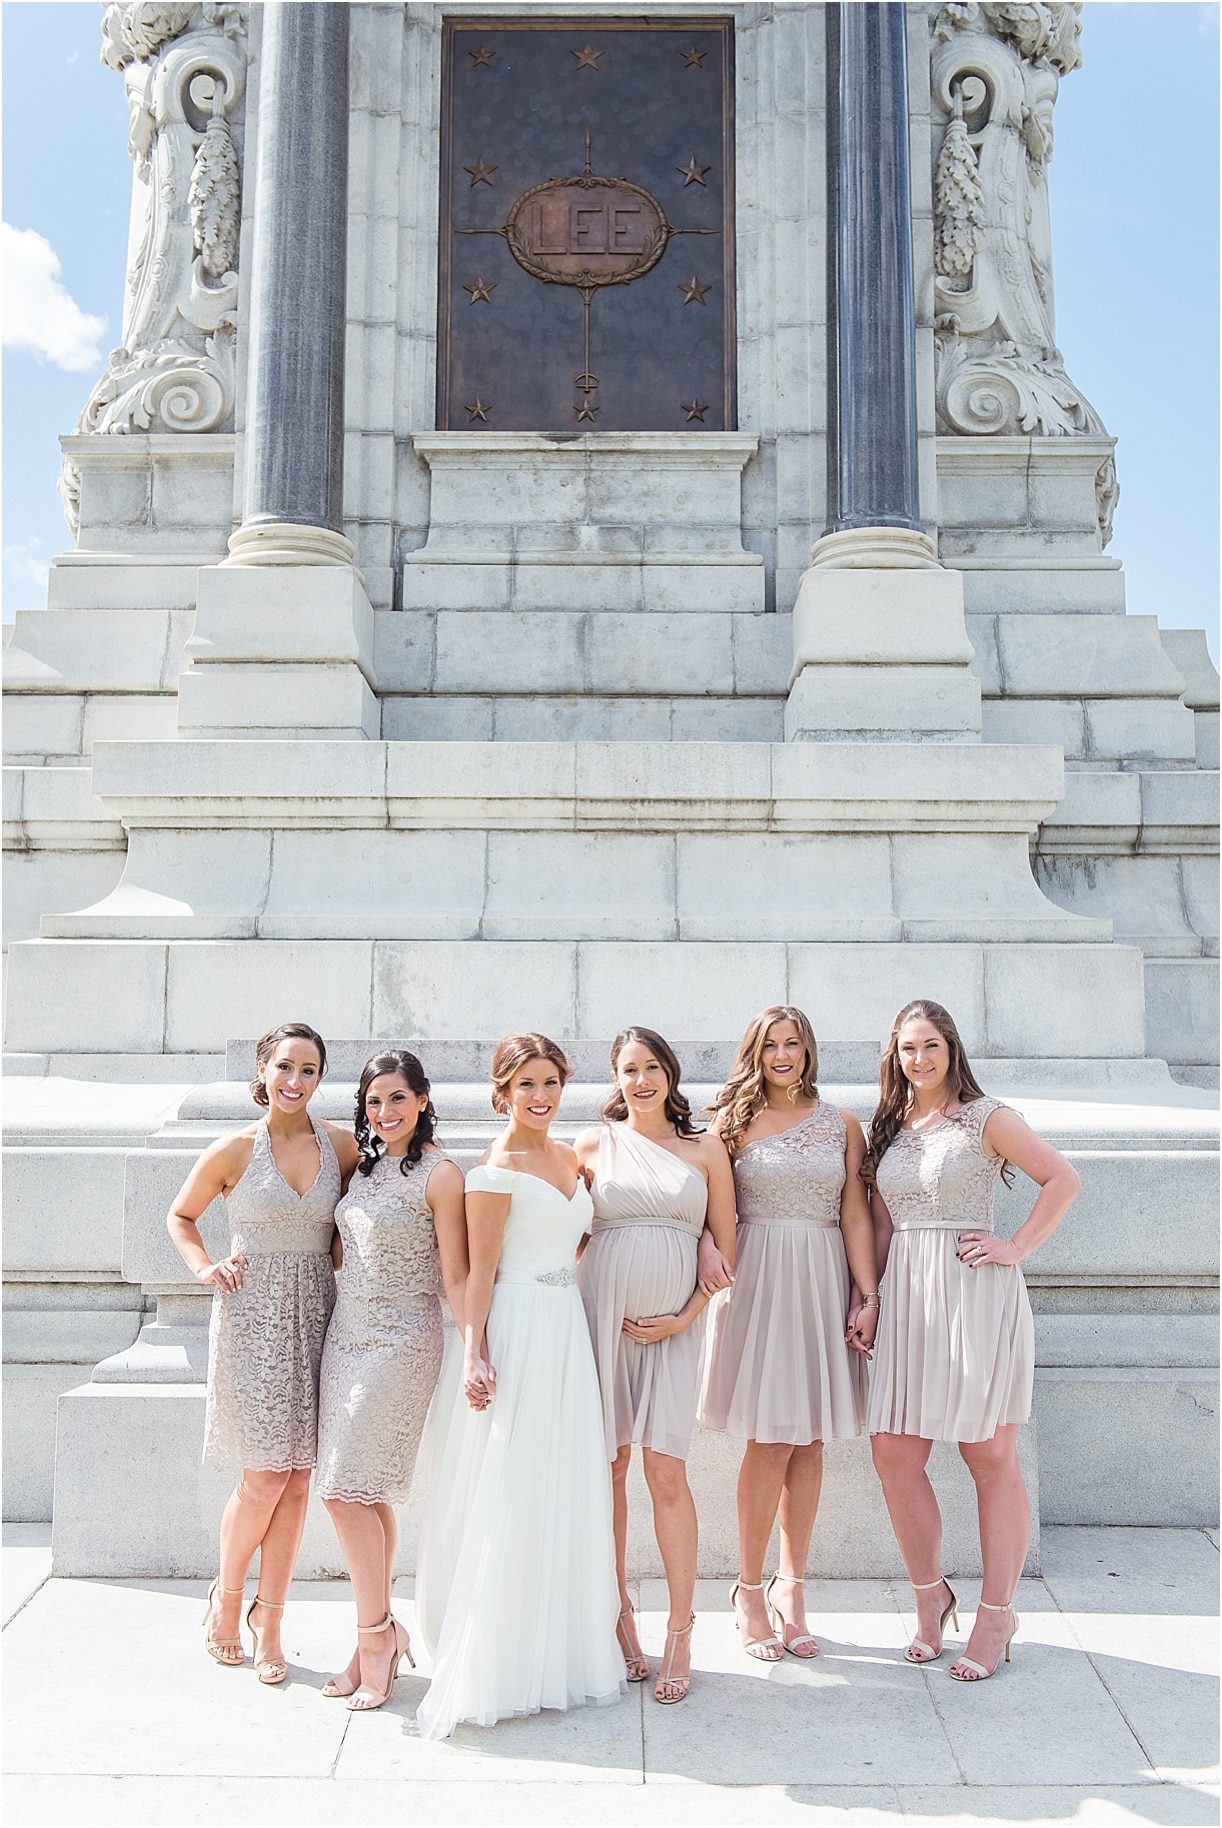 Sophisticated Richmond Wedding in Virginia as seen on Hill City Bride by Melissa Desjardins Photography Bridesmaids